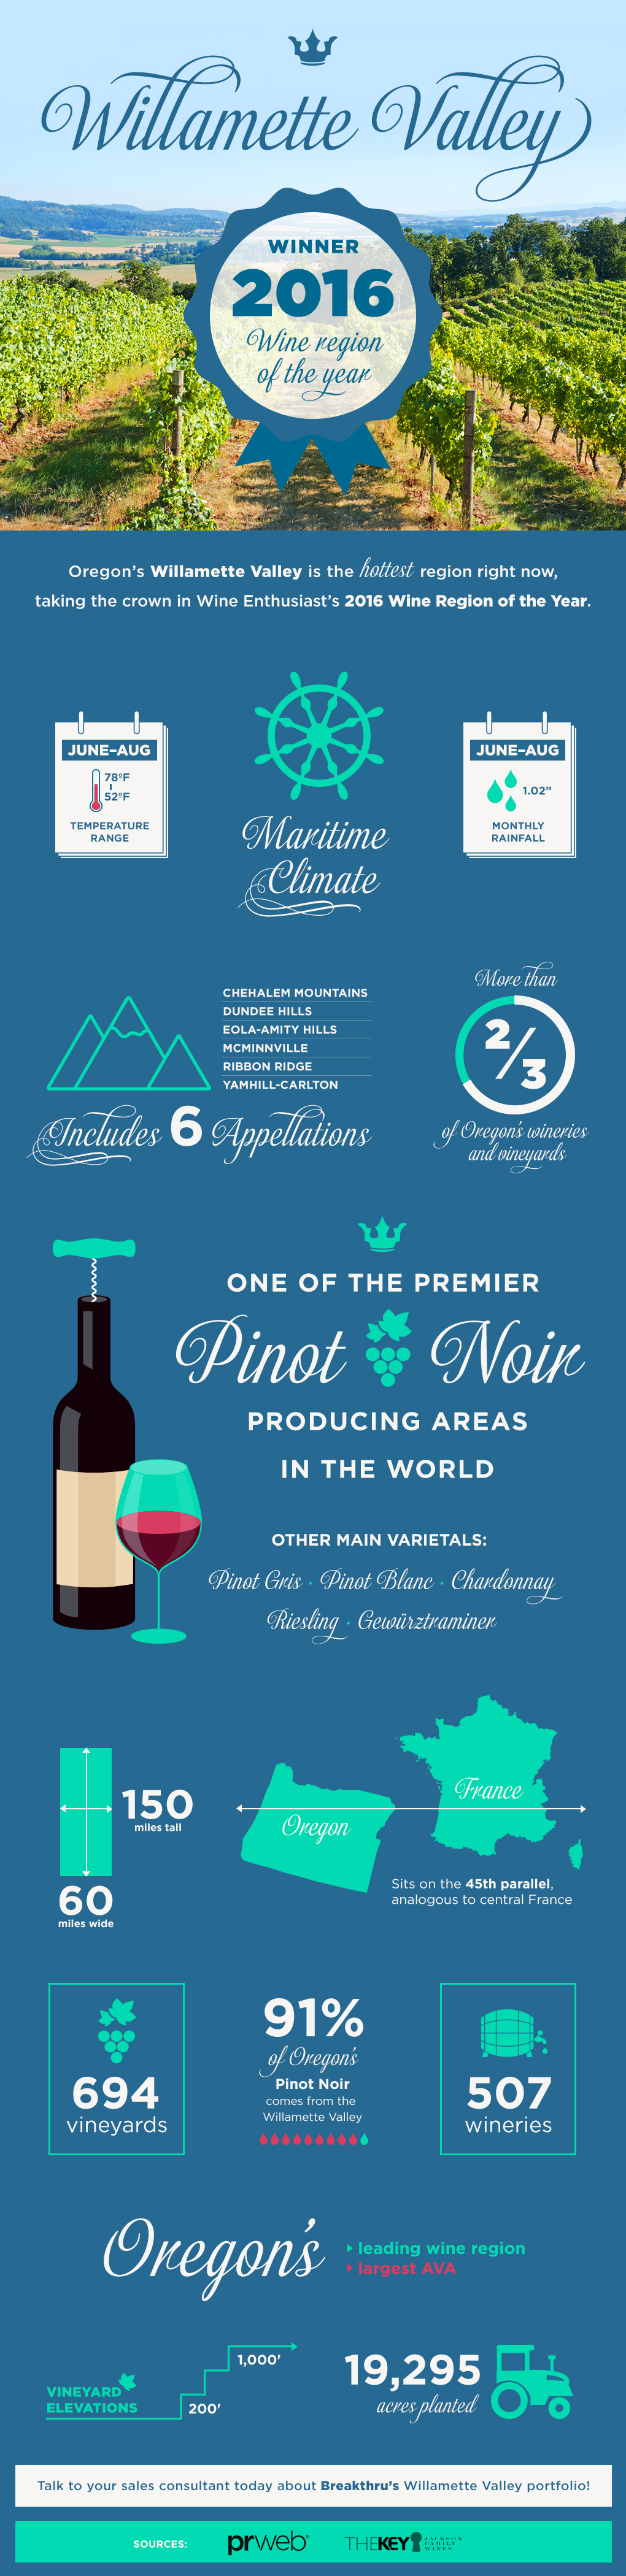 Willamette Valley Landing Page Infographic